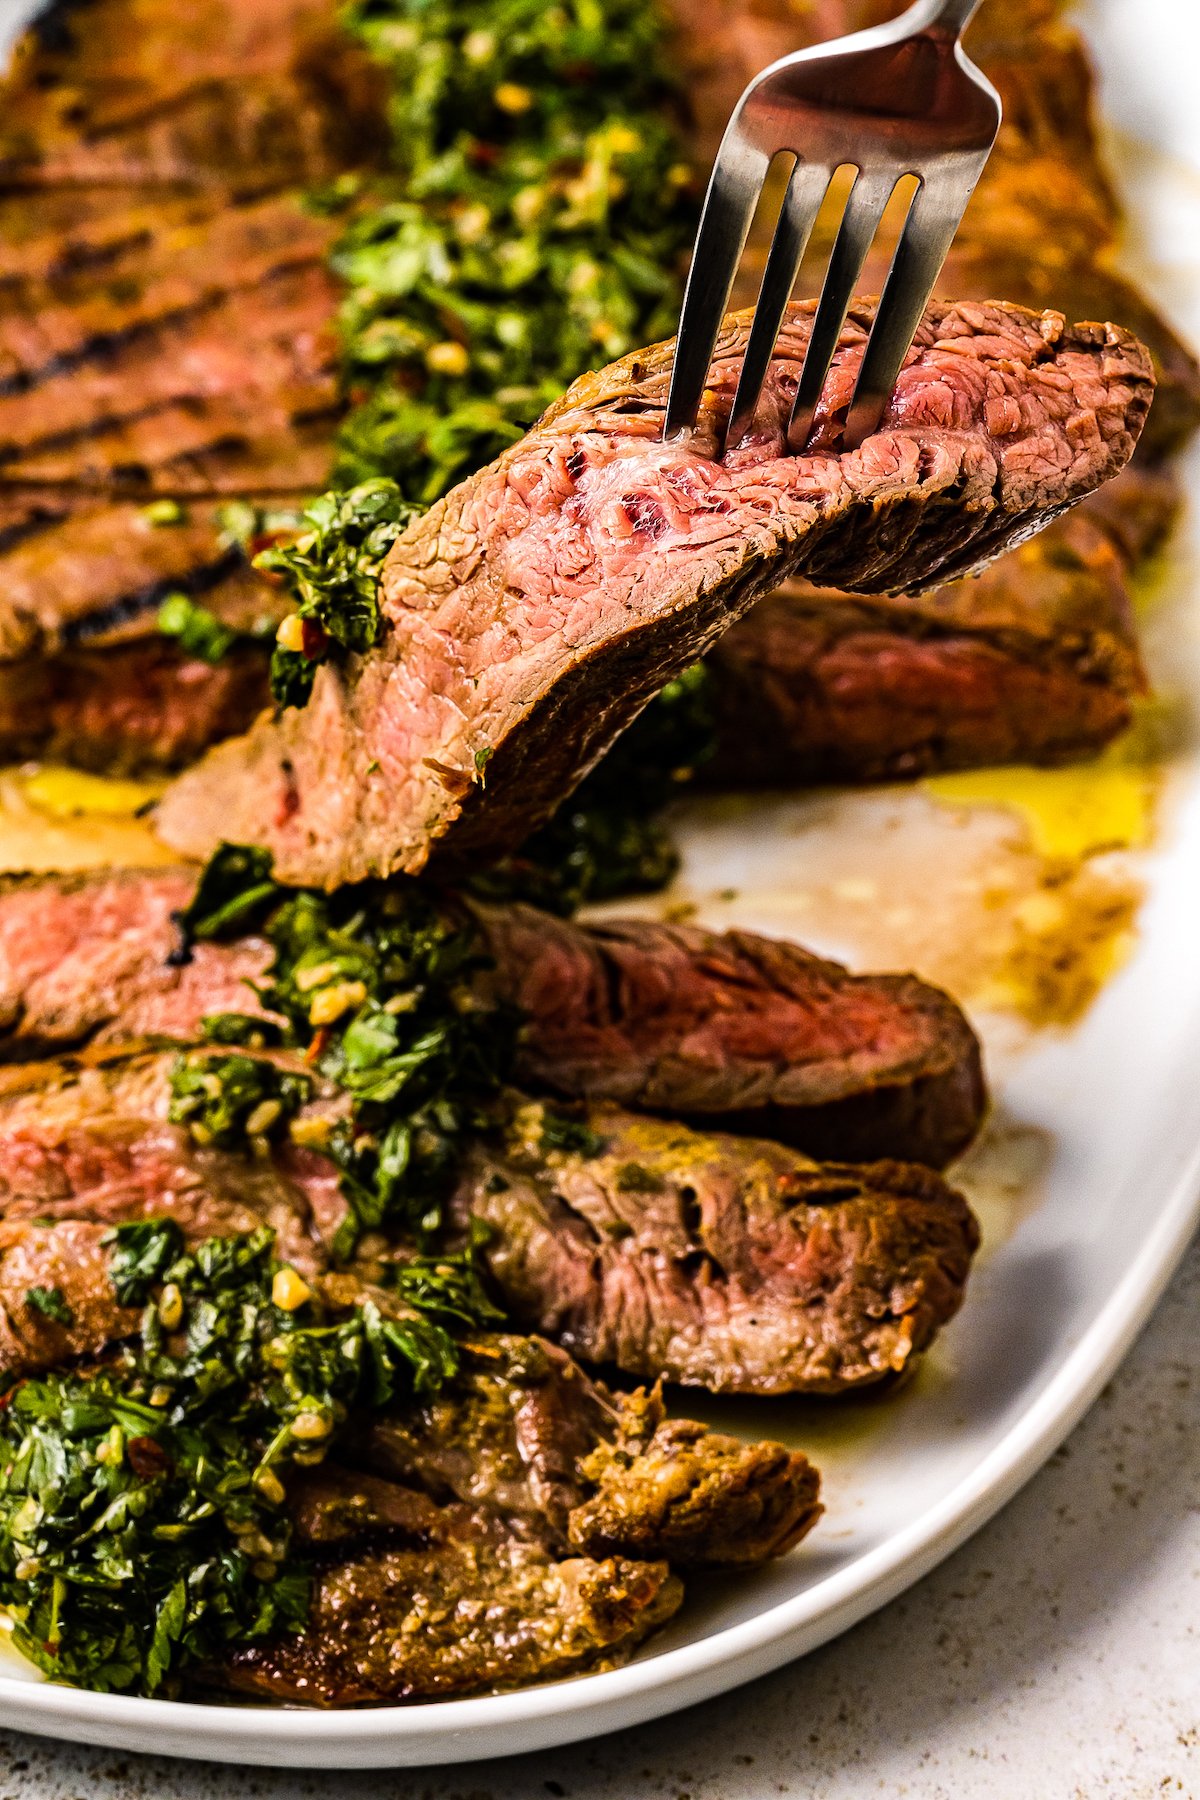 Sliced Churrasco Steak with chimichurri on top on a plate with a fork picking up a piece.